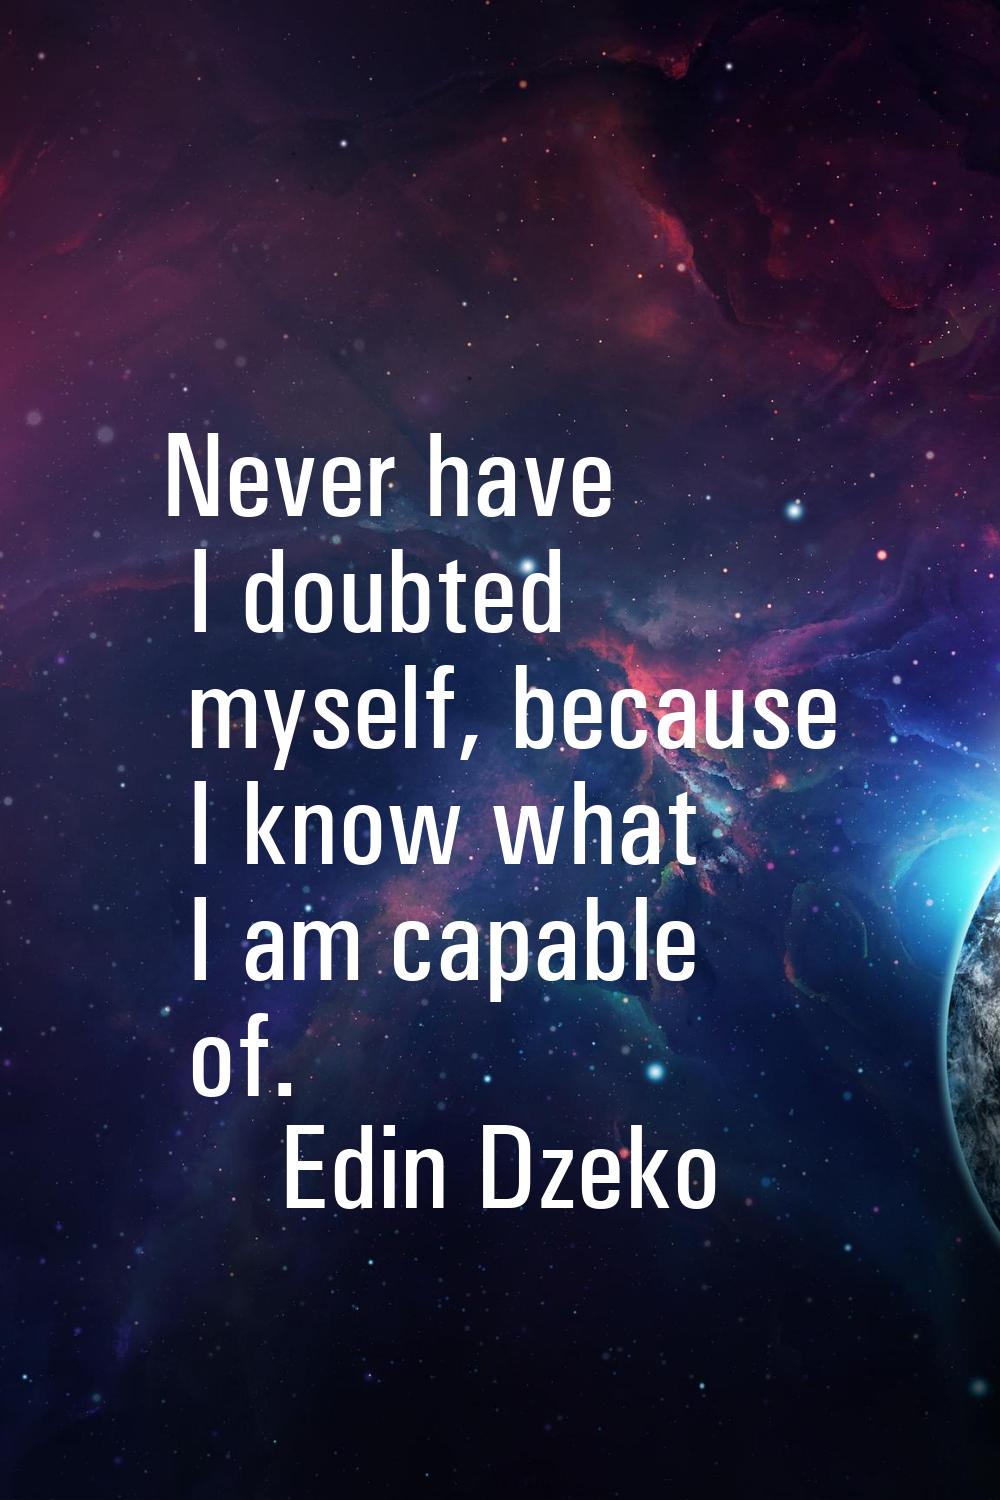 Never have I doubted myself, because I know what I am capable of.